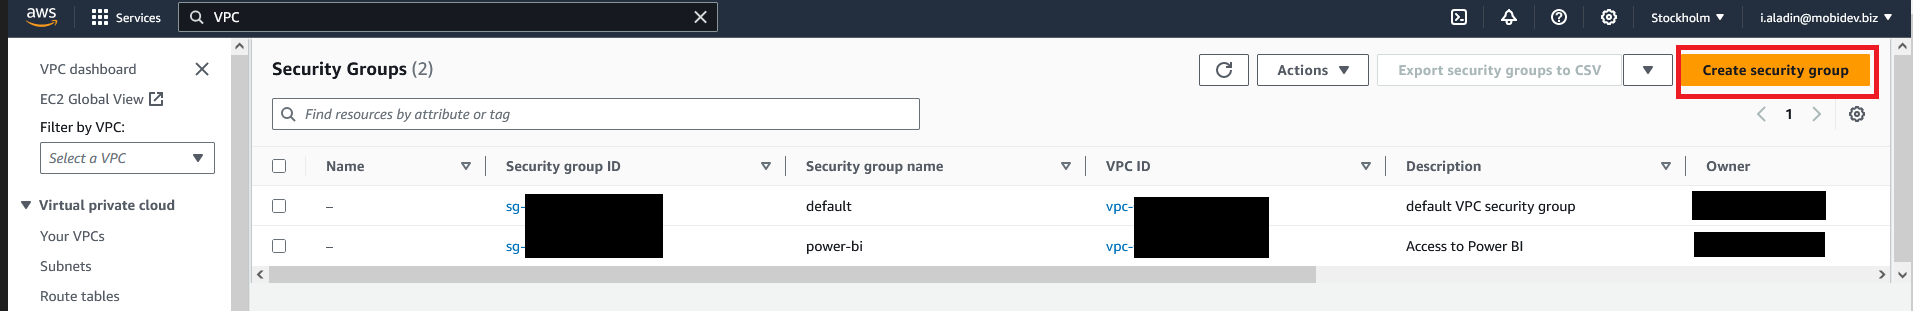 Create security group button